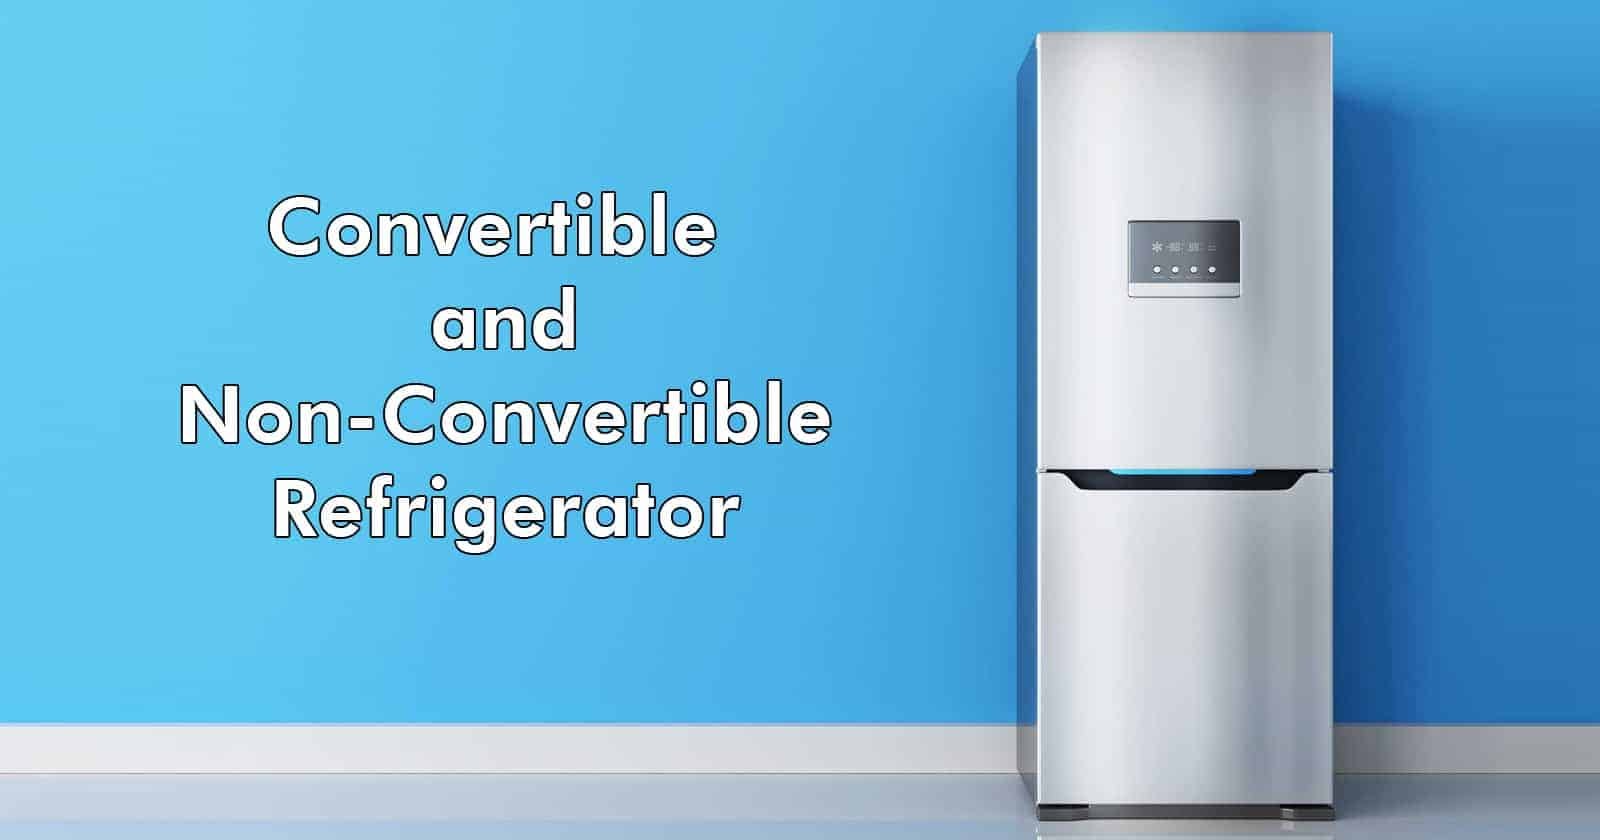 Difference Between Convertible and Non-Convertible Refrigerator